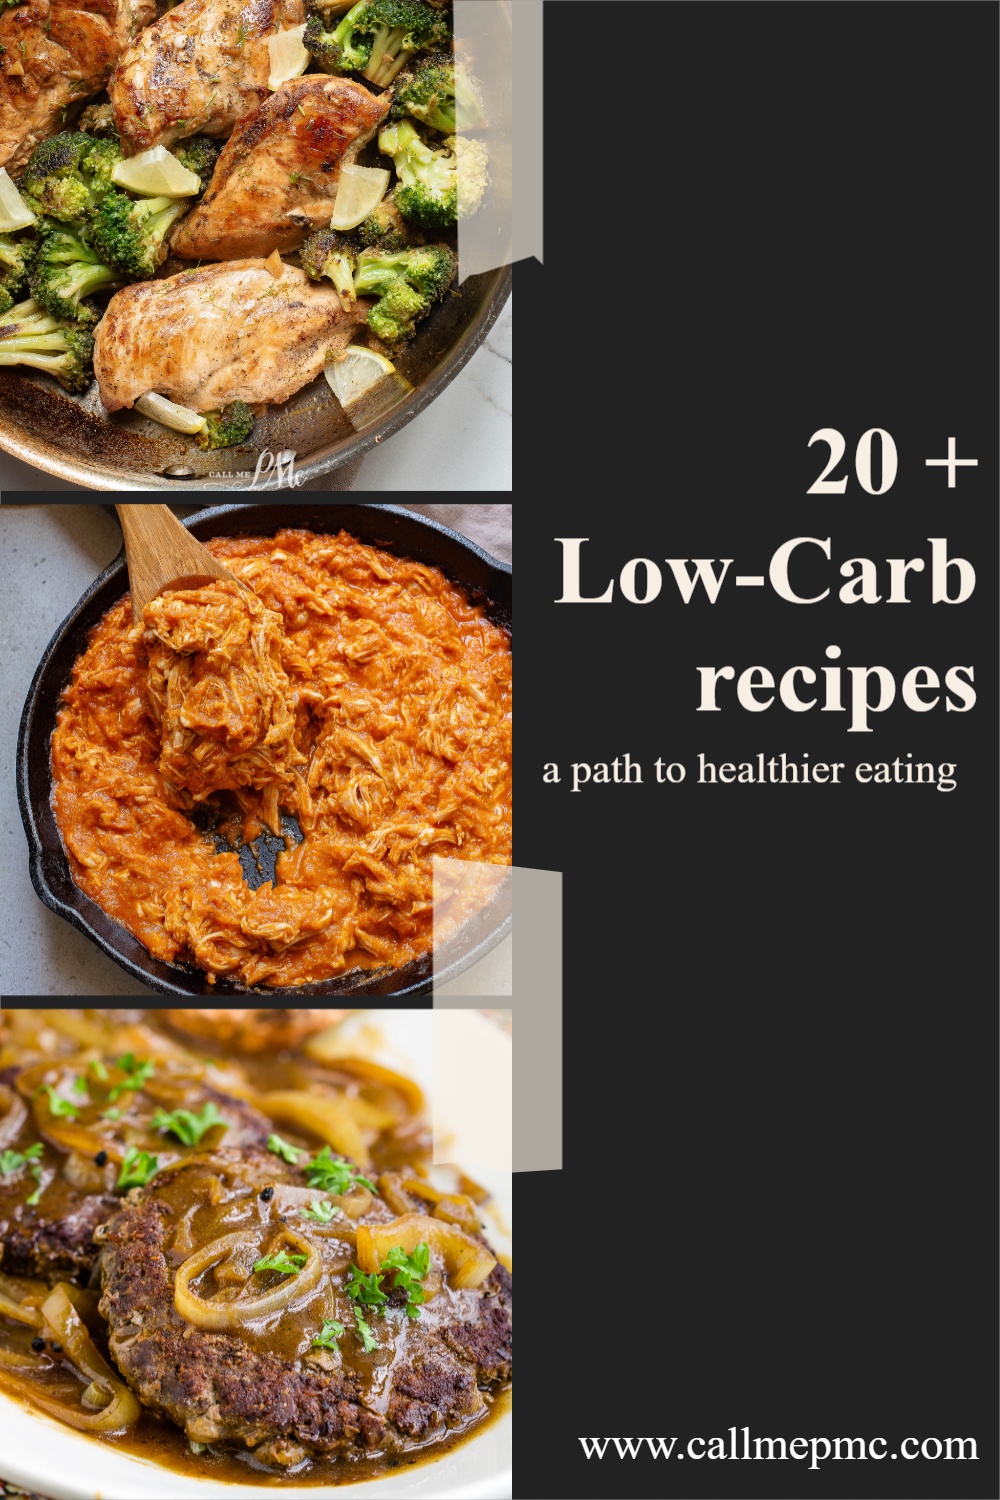 20 low carb and keto recipes for a path to healthier eating.